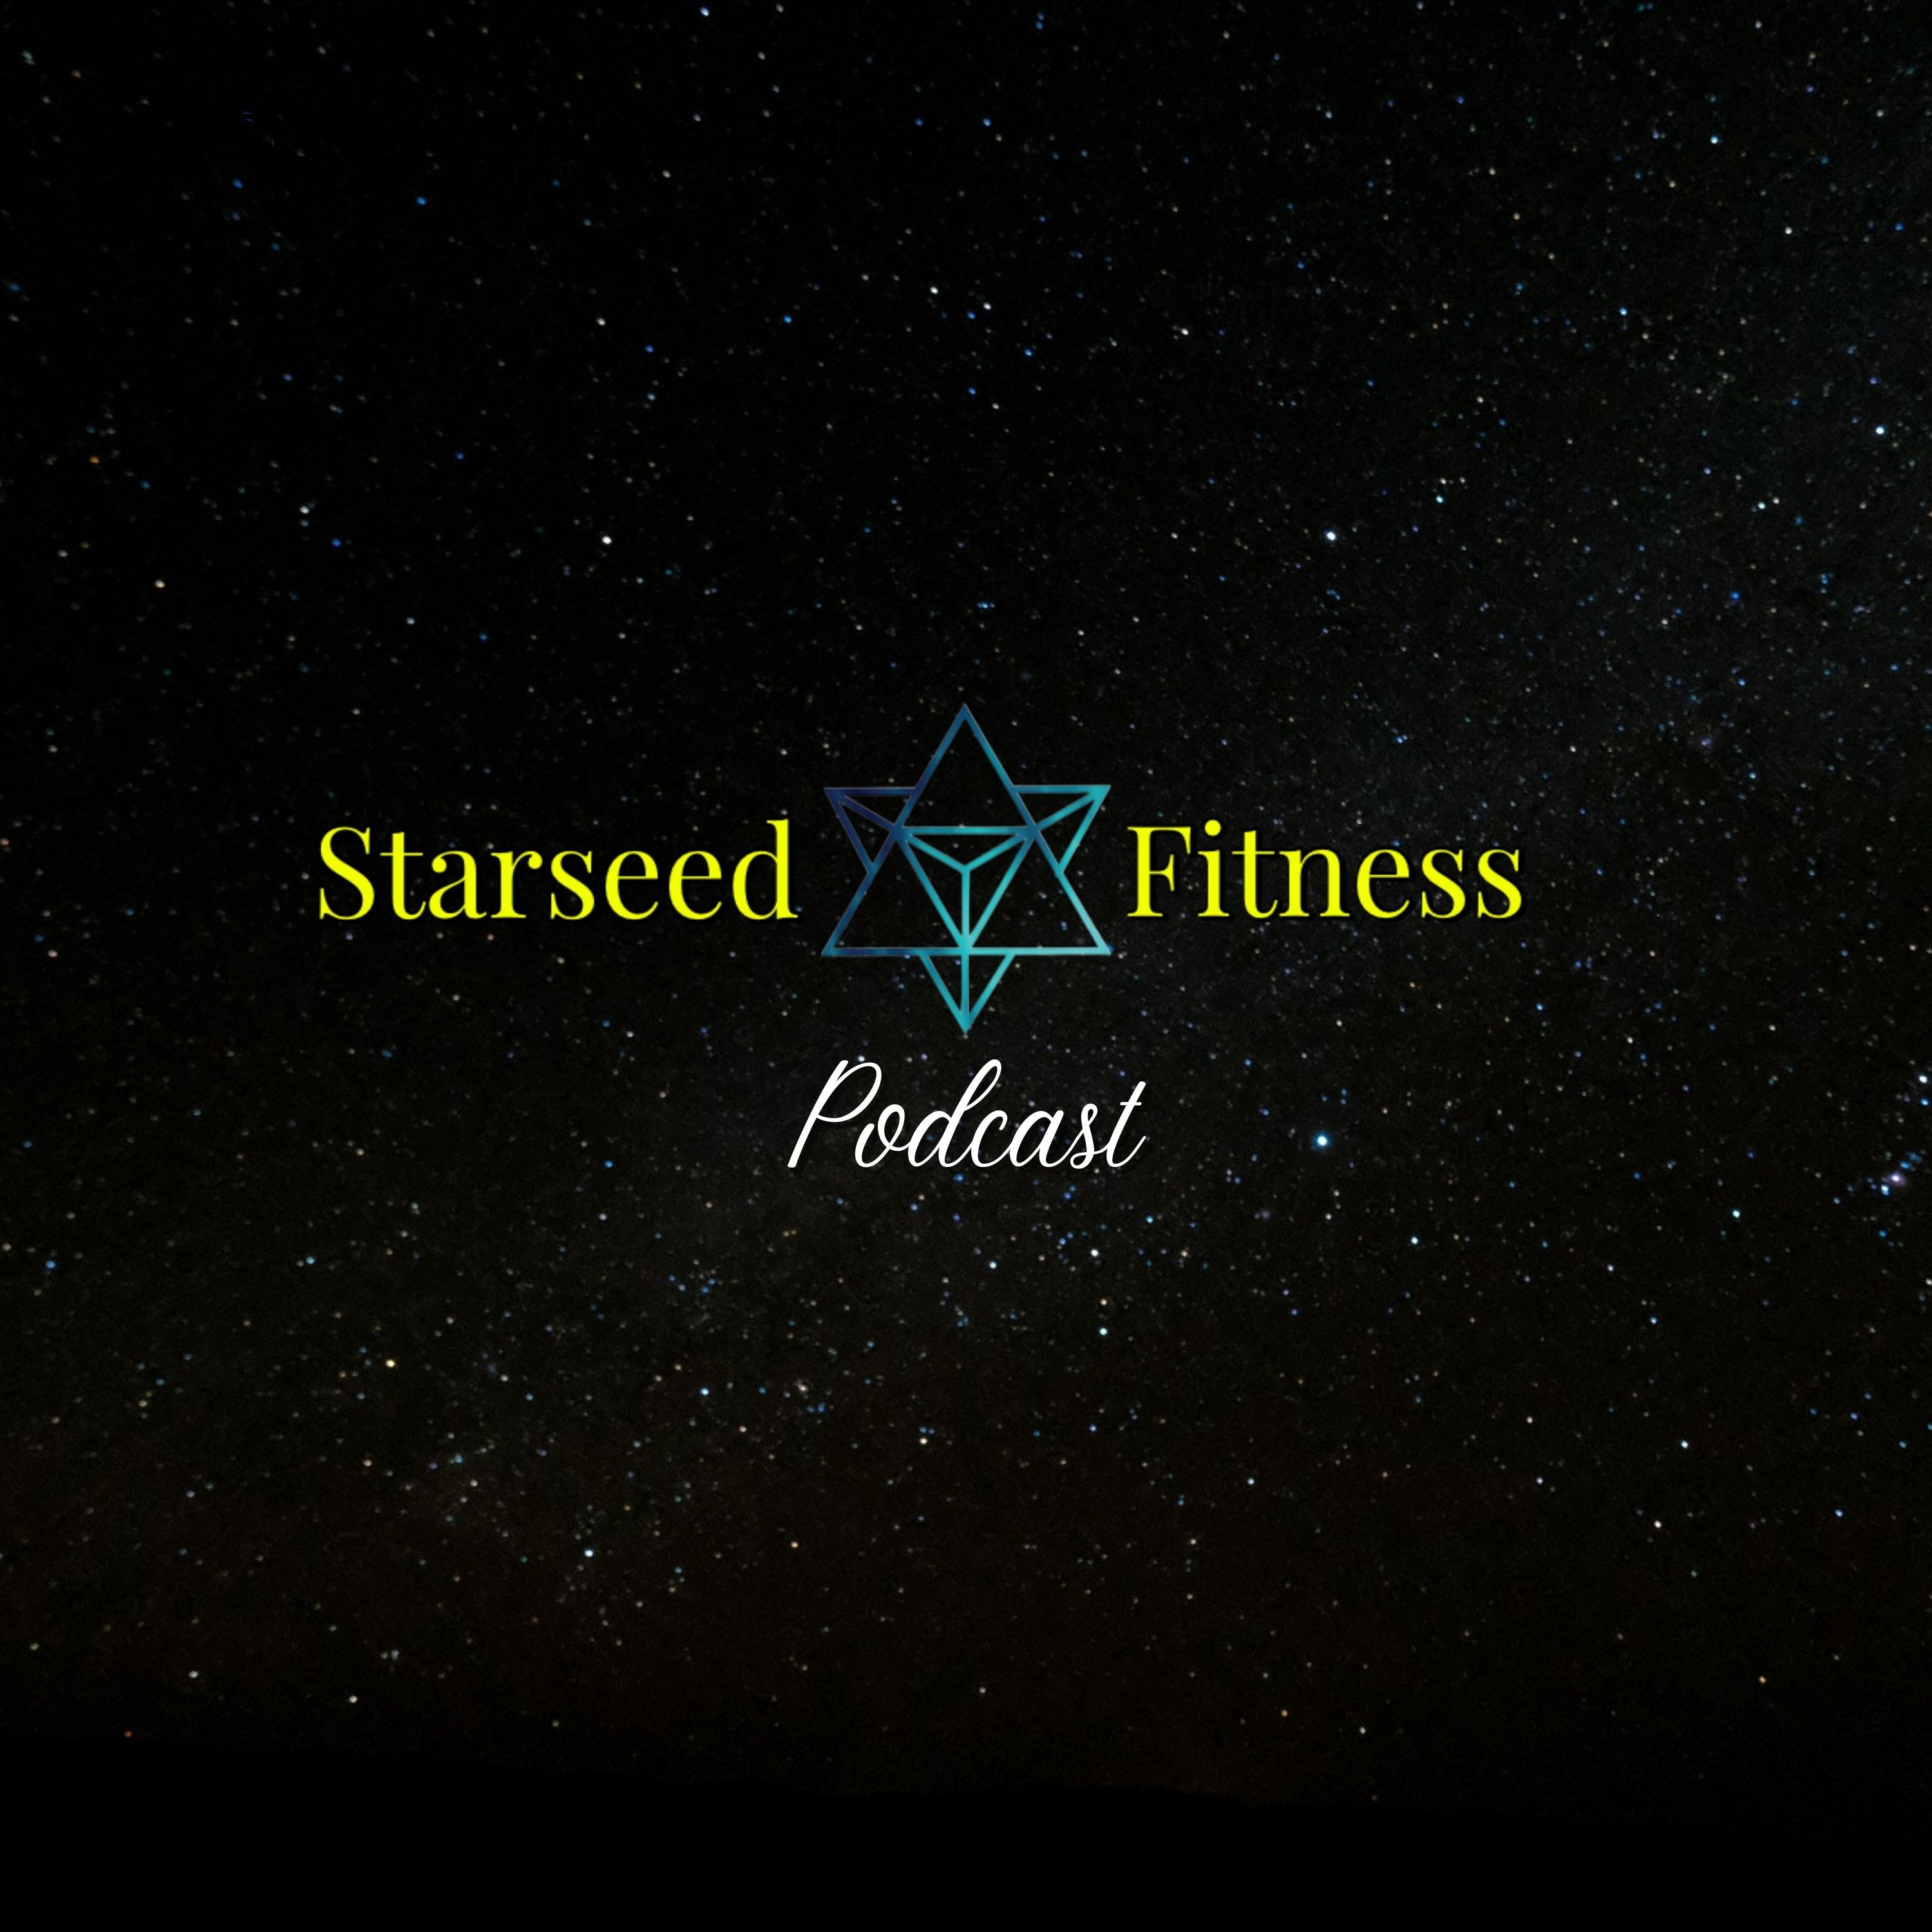 The Starseed Fitness Podcast